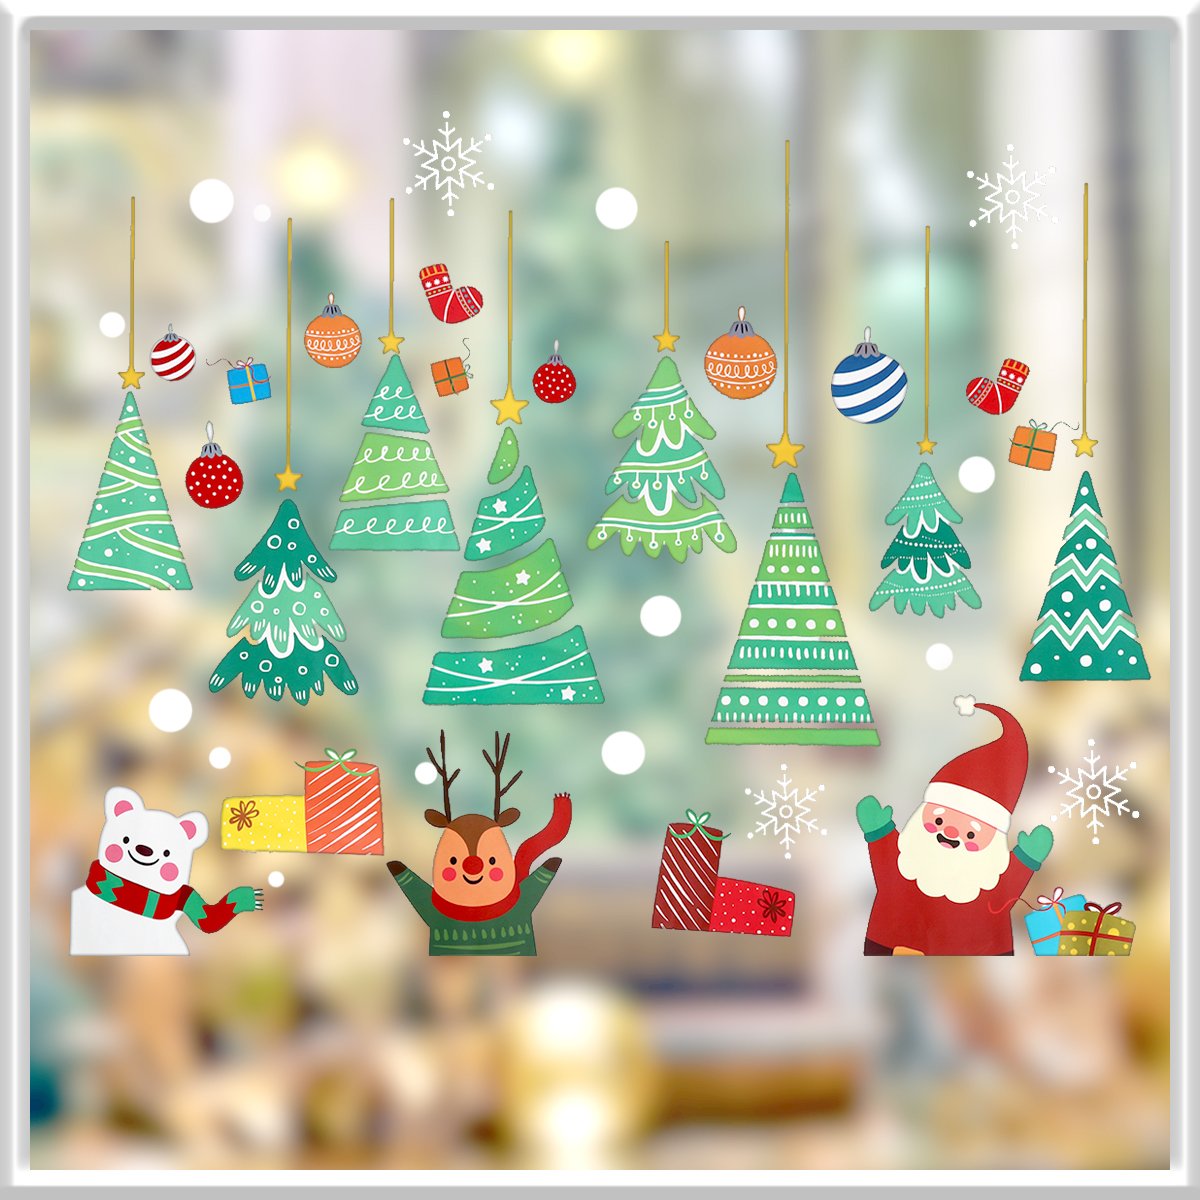 Merry Christmas Wallpaper The Santa Claus Removable Wall Stickers Art Decals Mural DIY Wallpaper for Room Decal